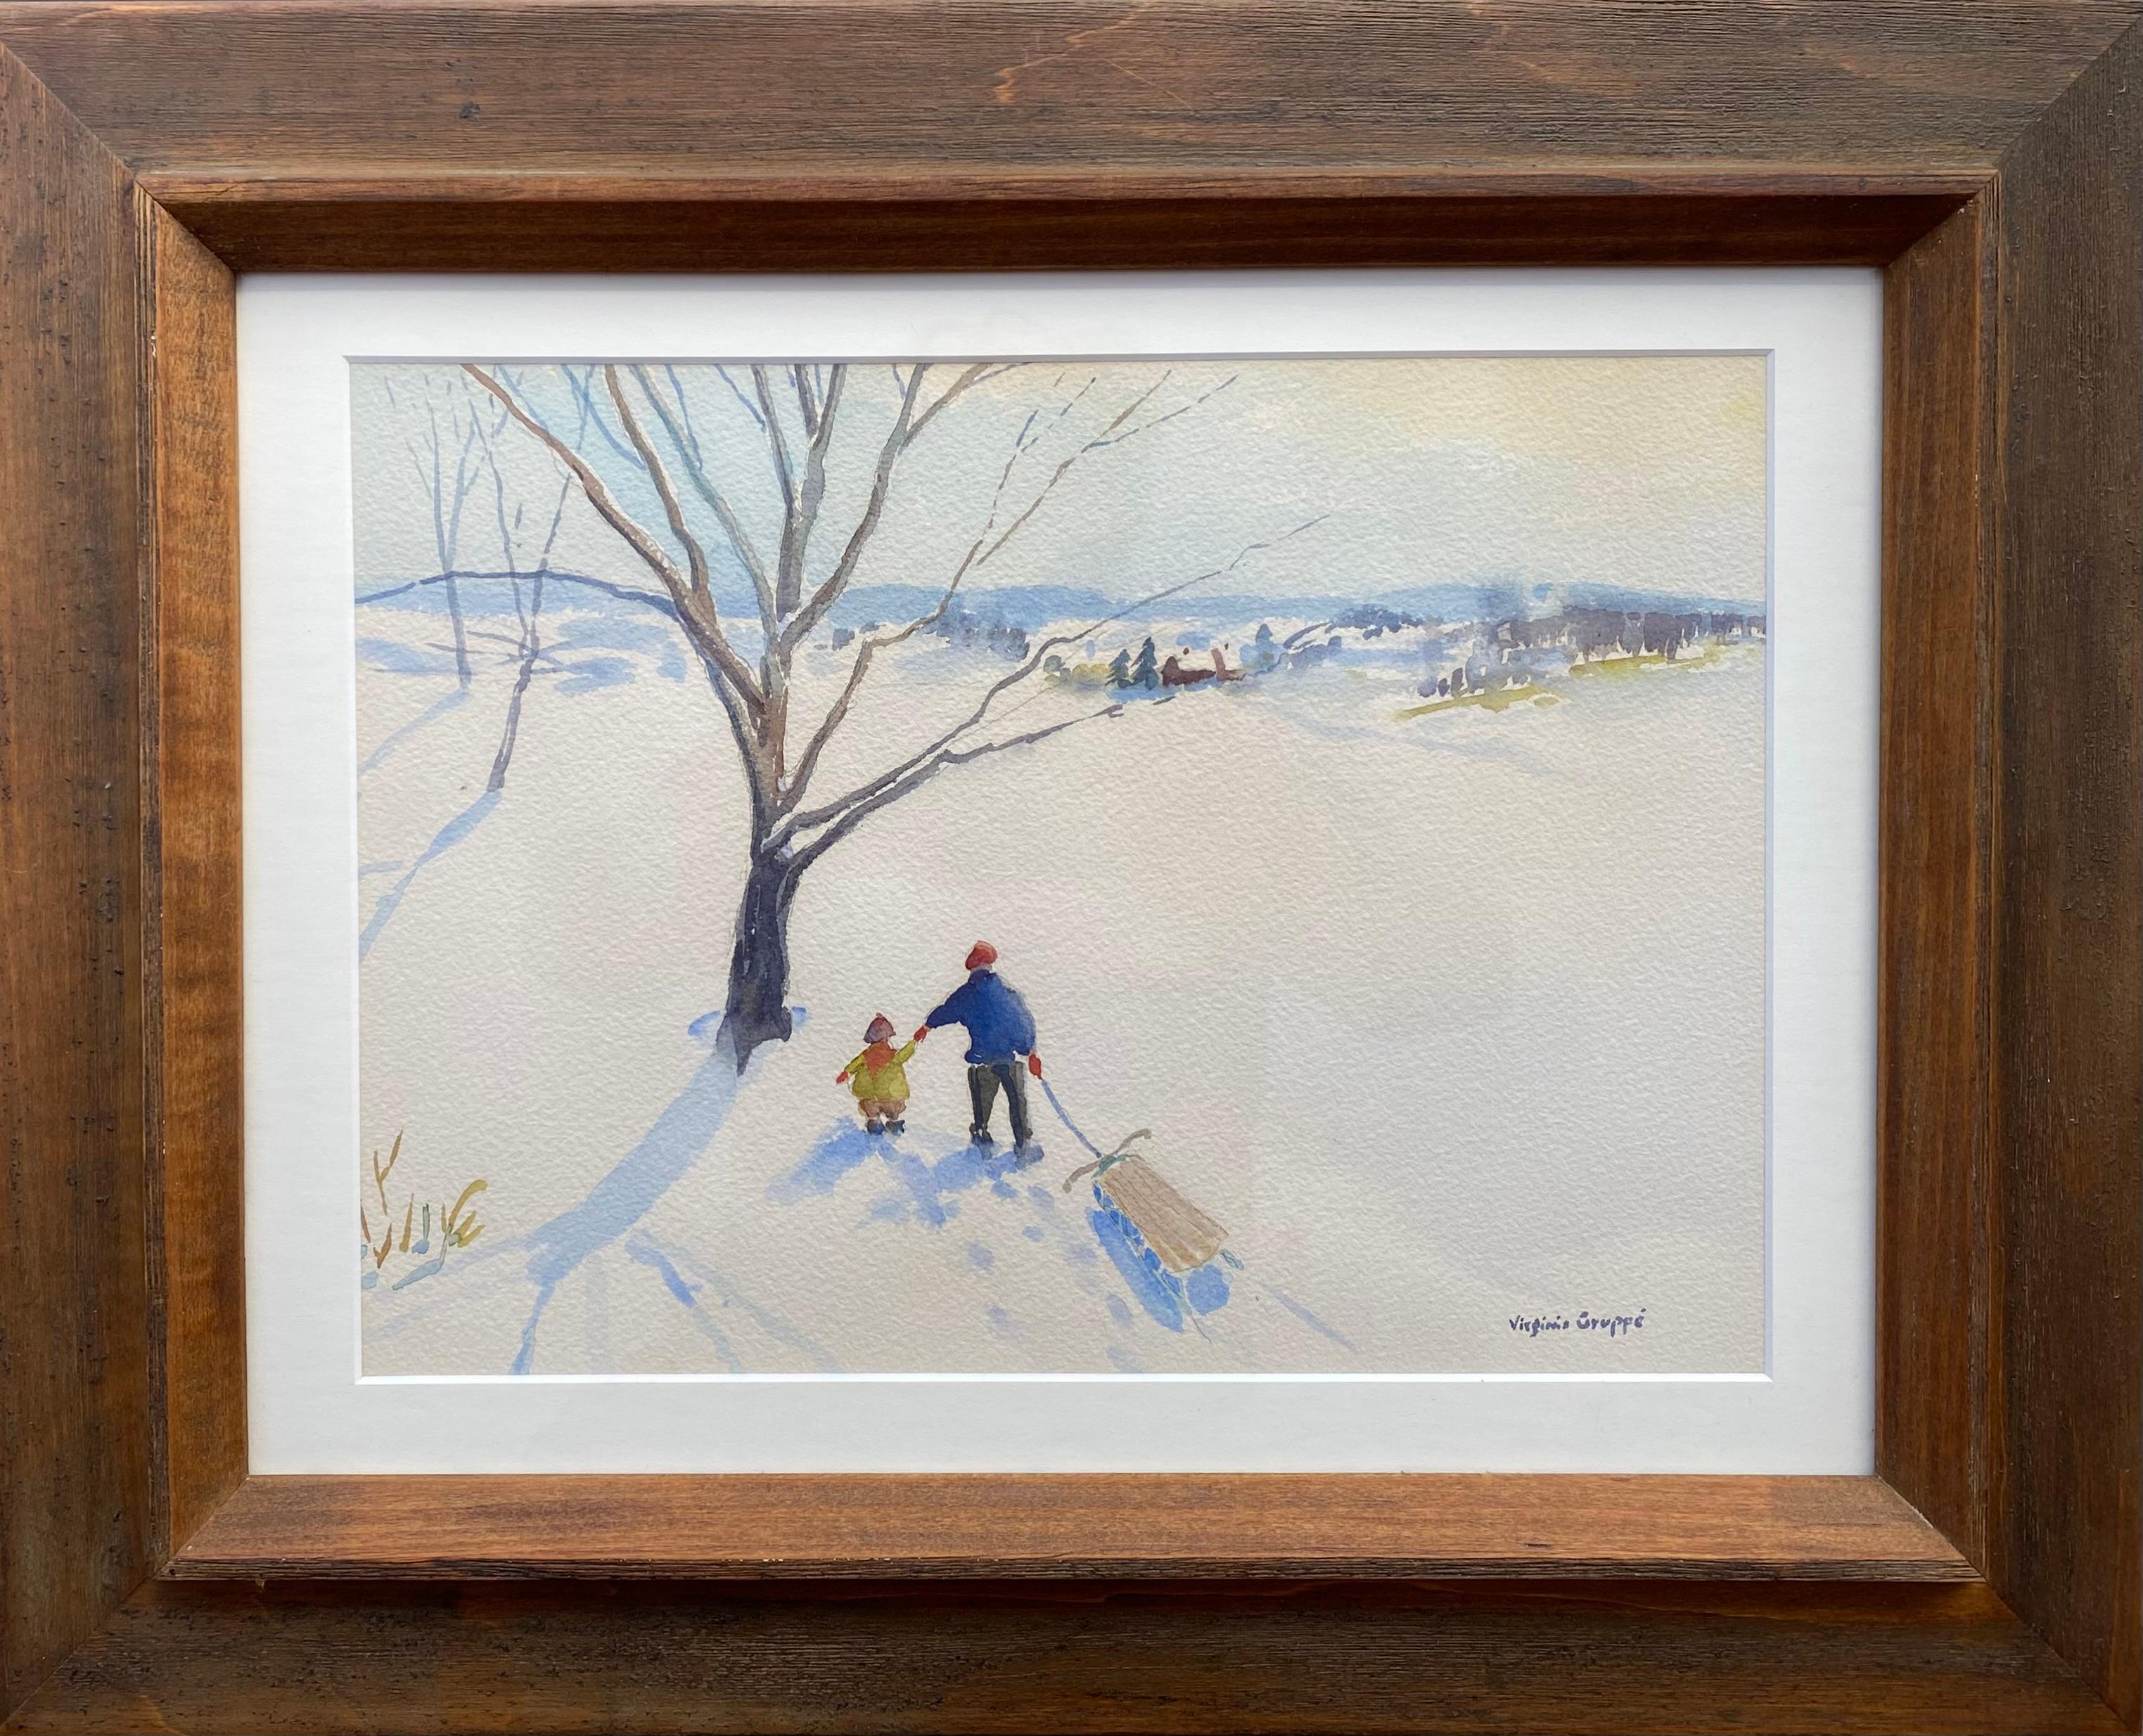 Original watercolor on paper of a man and his child heading home after a day of snow sleighing.  Signed lower right. Circa 1950. Condition is excellent. Under glass.  The watercolor is housed In its original grey washed wood frame. Overall framed